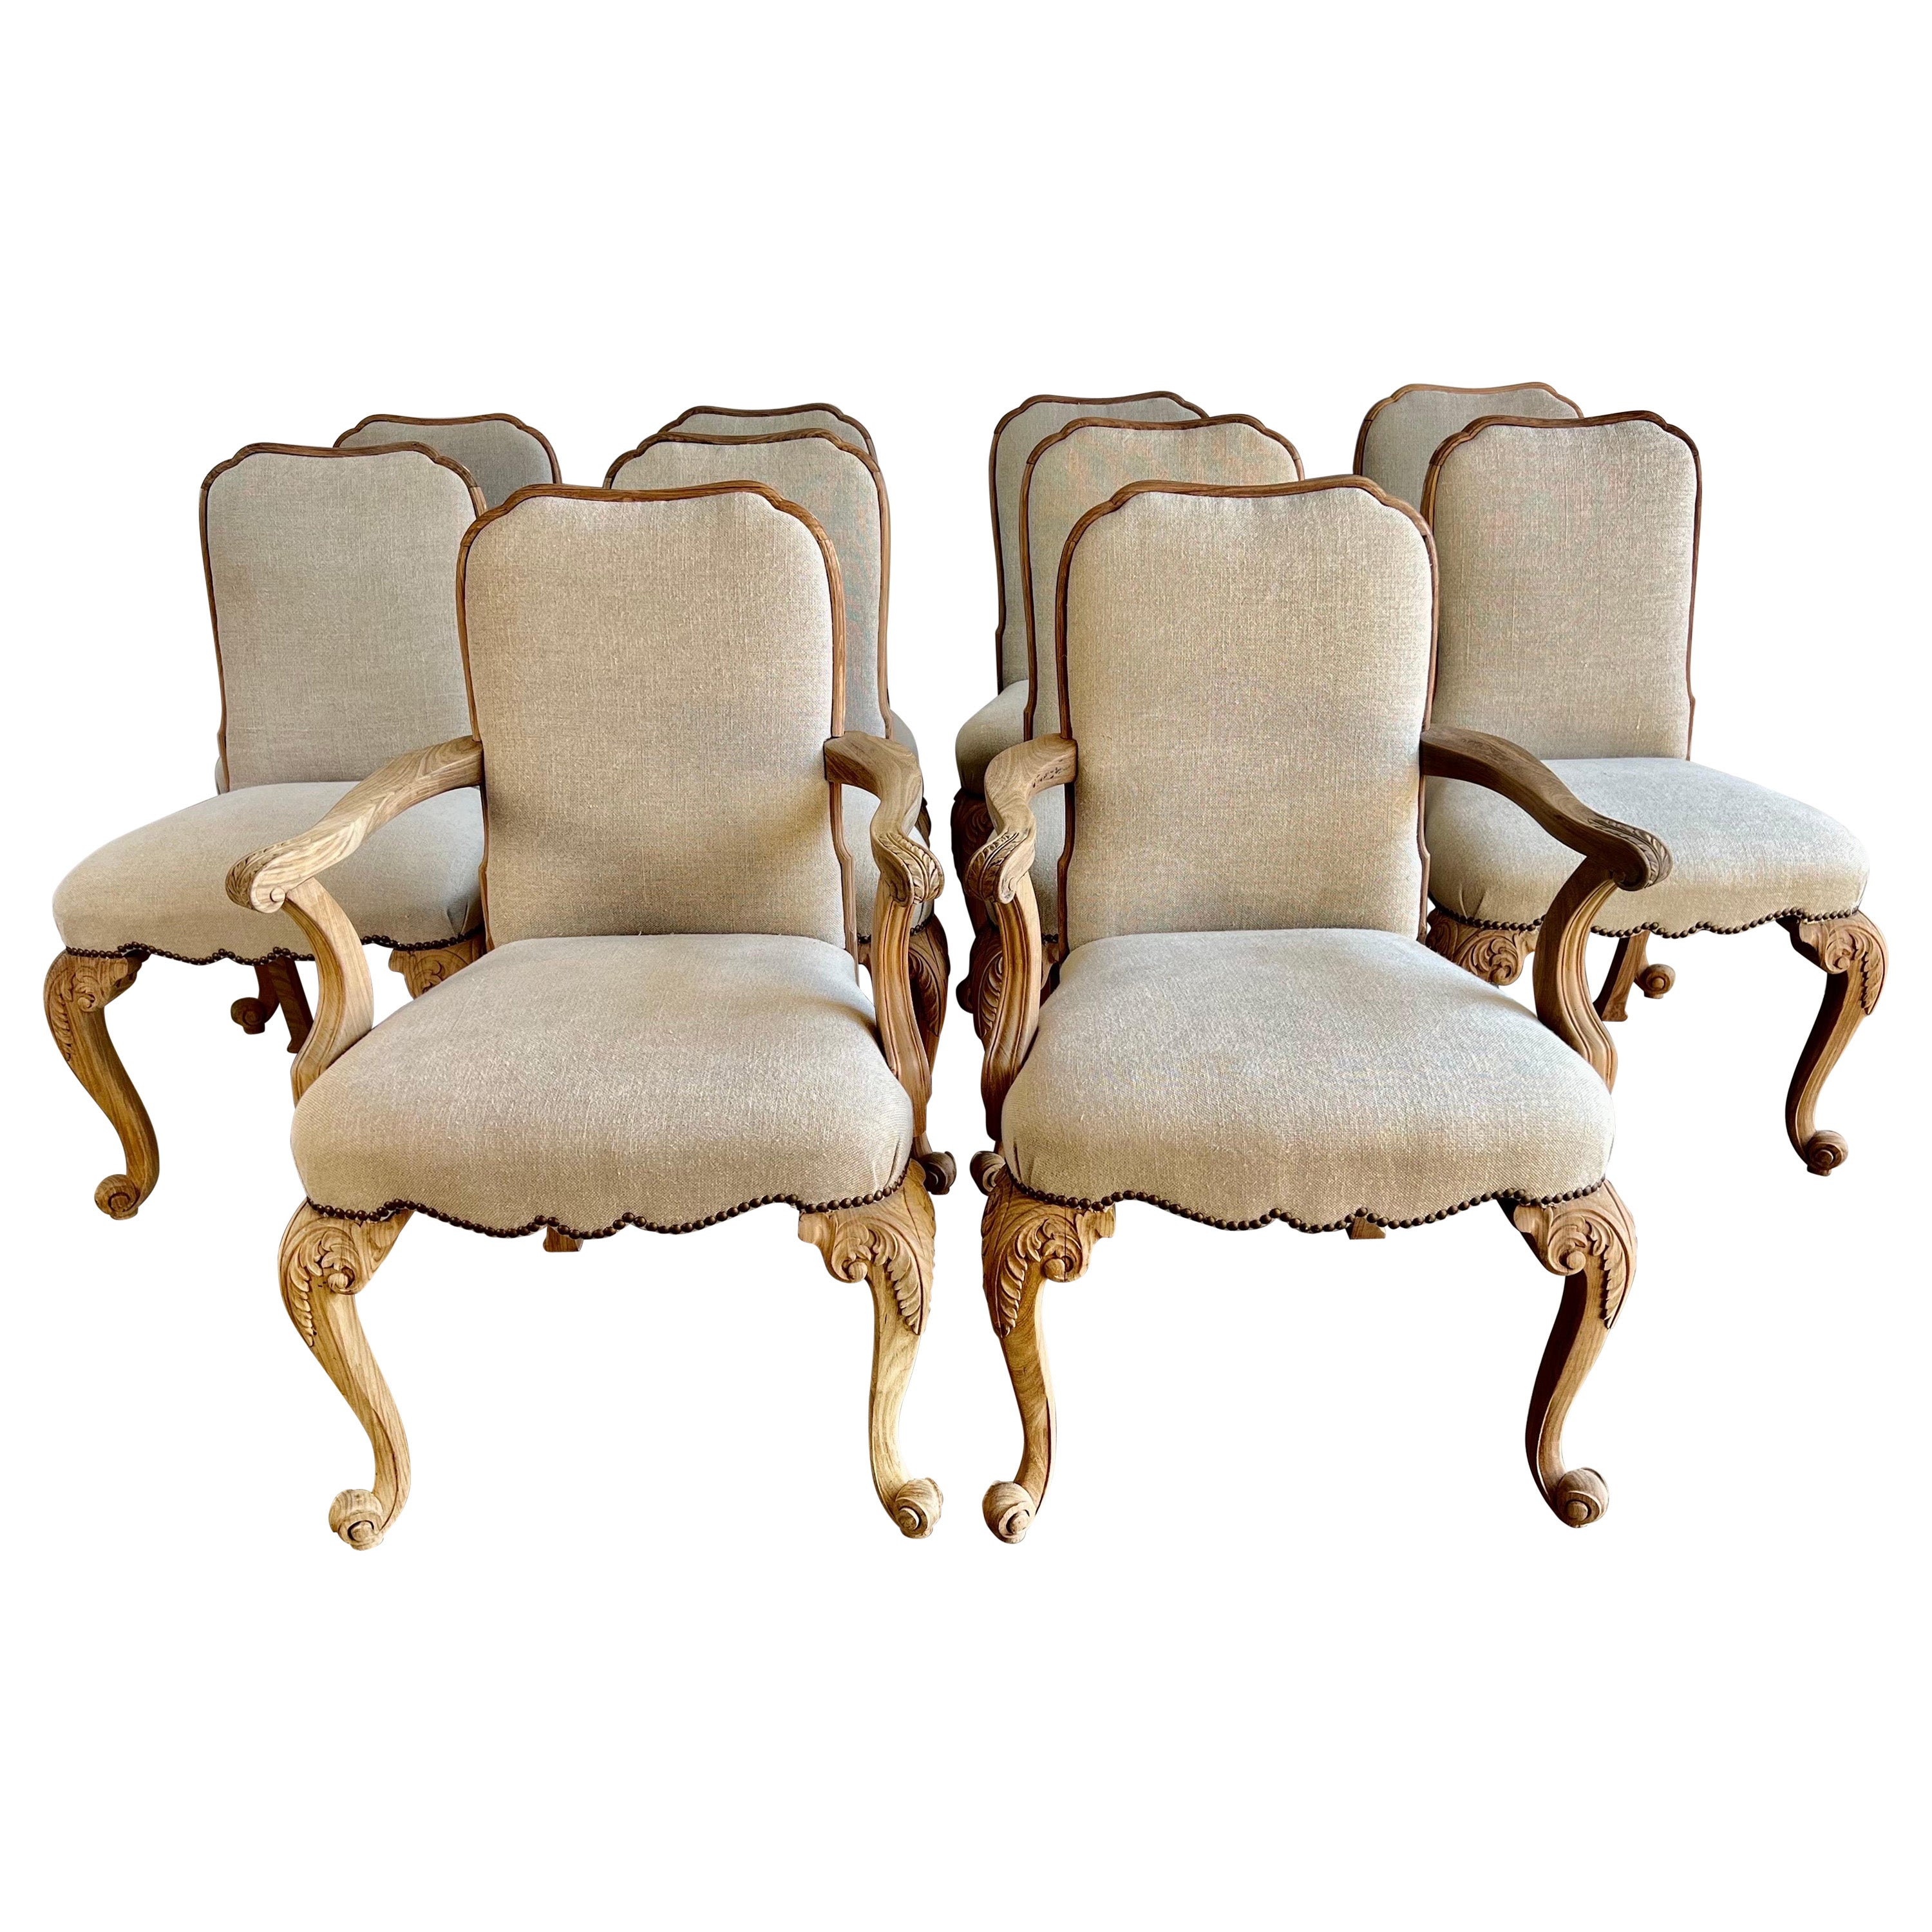 Set of Ten 19th C. French Dining Chairs